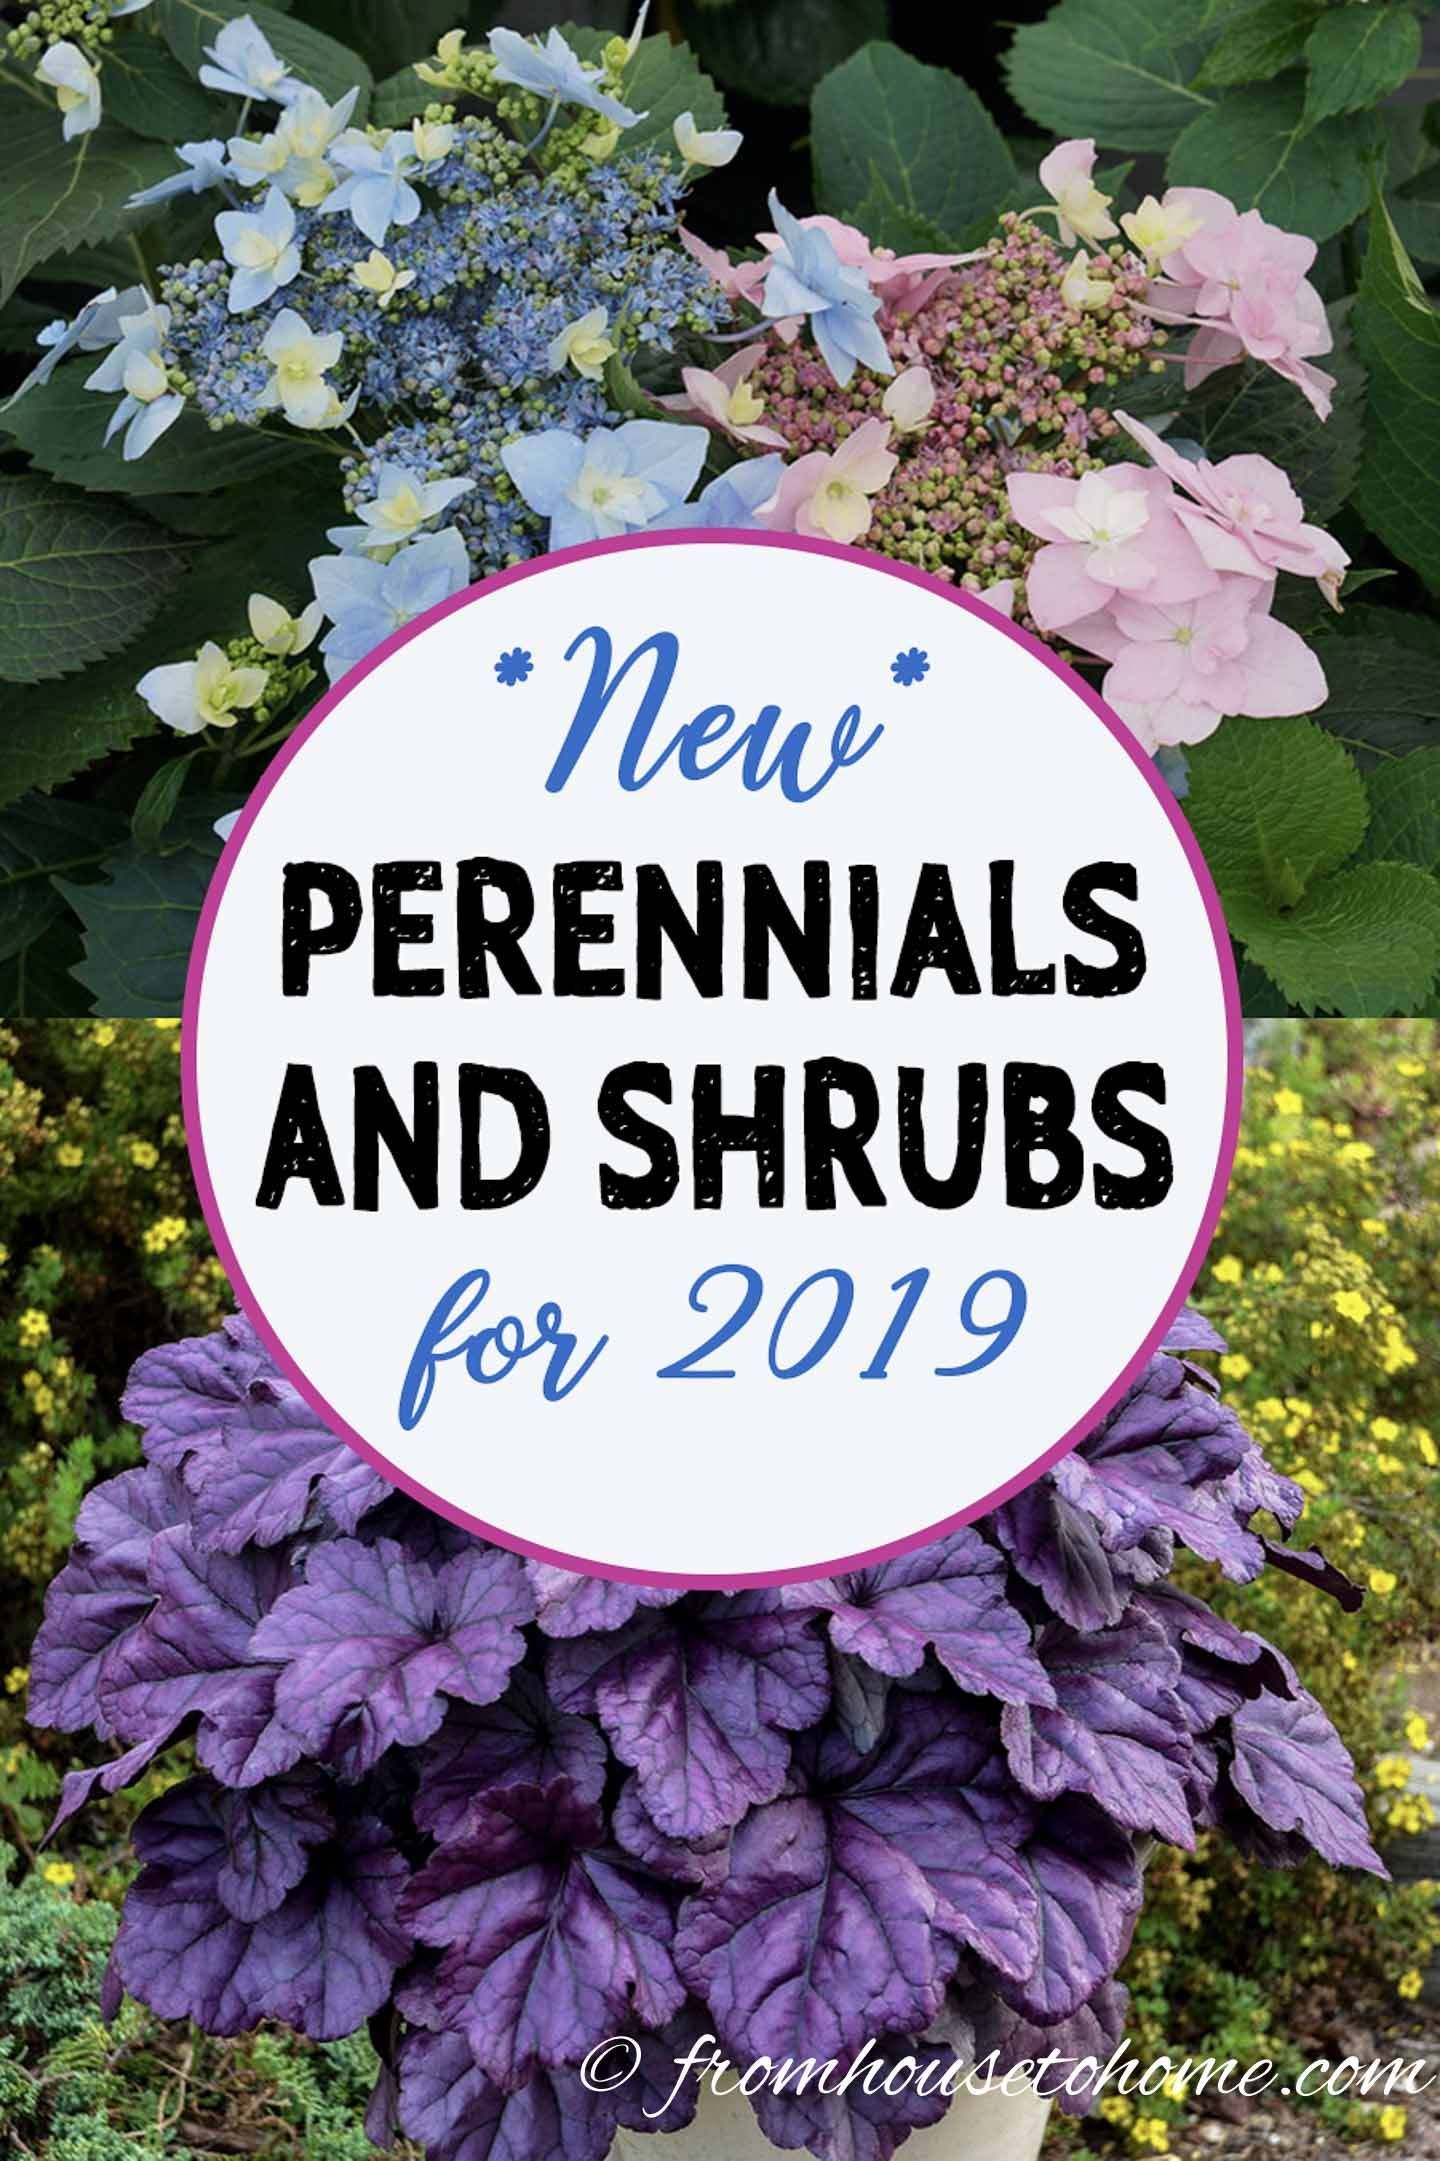 The Best New Perennials and Shrubs For 2019 -   24 outdoor garden spaces
 ideas